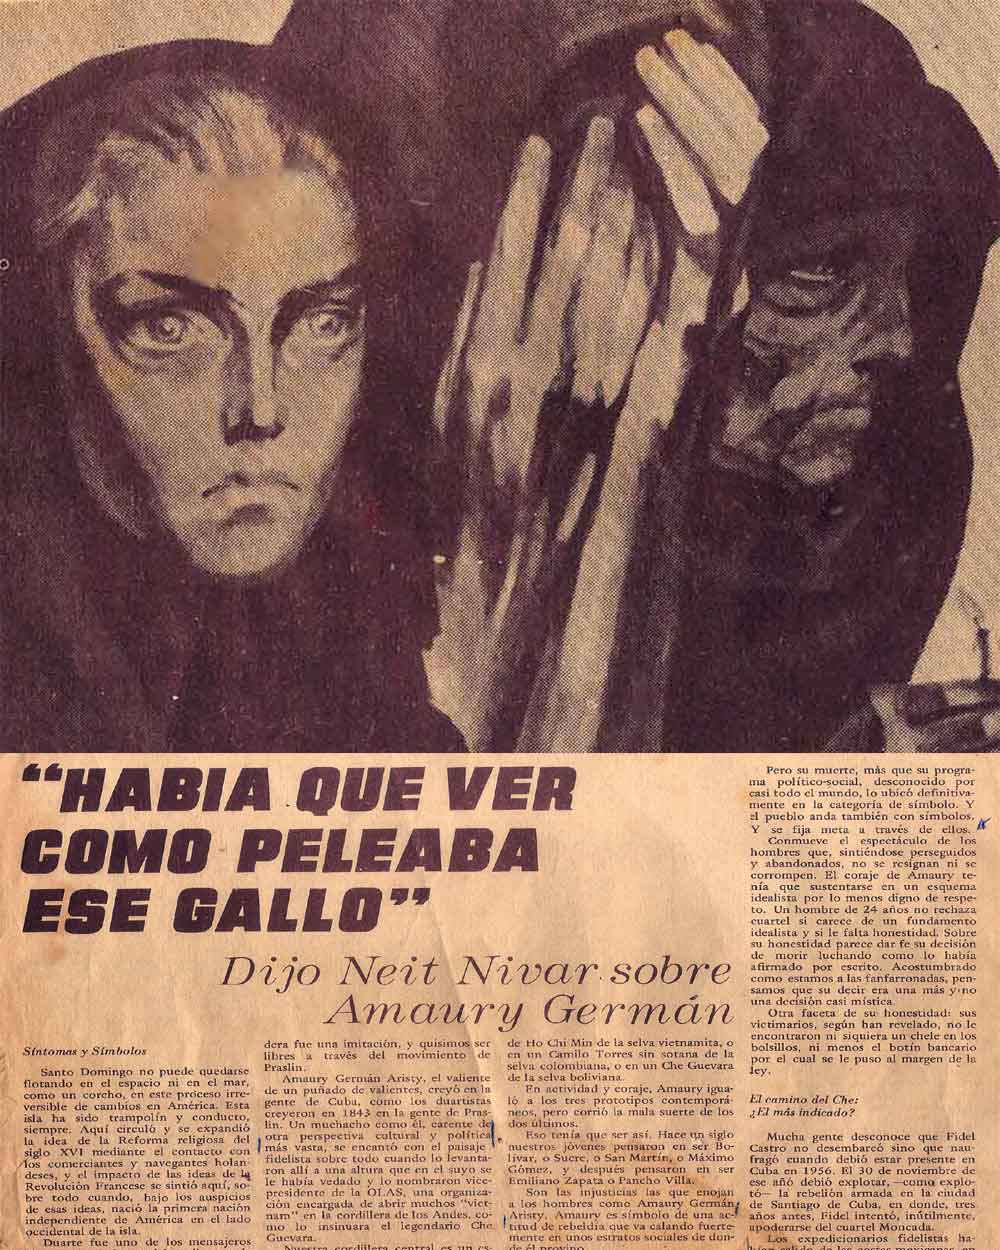 "Art as Sub-Realist  symptoms and symbols of the "Way to death but Together . " - .d:Analysis d:form causes and effects of Combat 12 January of the year 1972. -By: Magazine renewal year 1972. © . (x) Gregory Garcia Castro and Julio Cesar Martinez. -data transfer. Logistical Workshops "clappers" 2013rd- .format on the Web: 8 x 10.